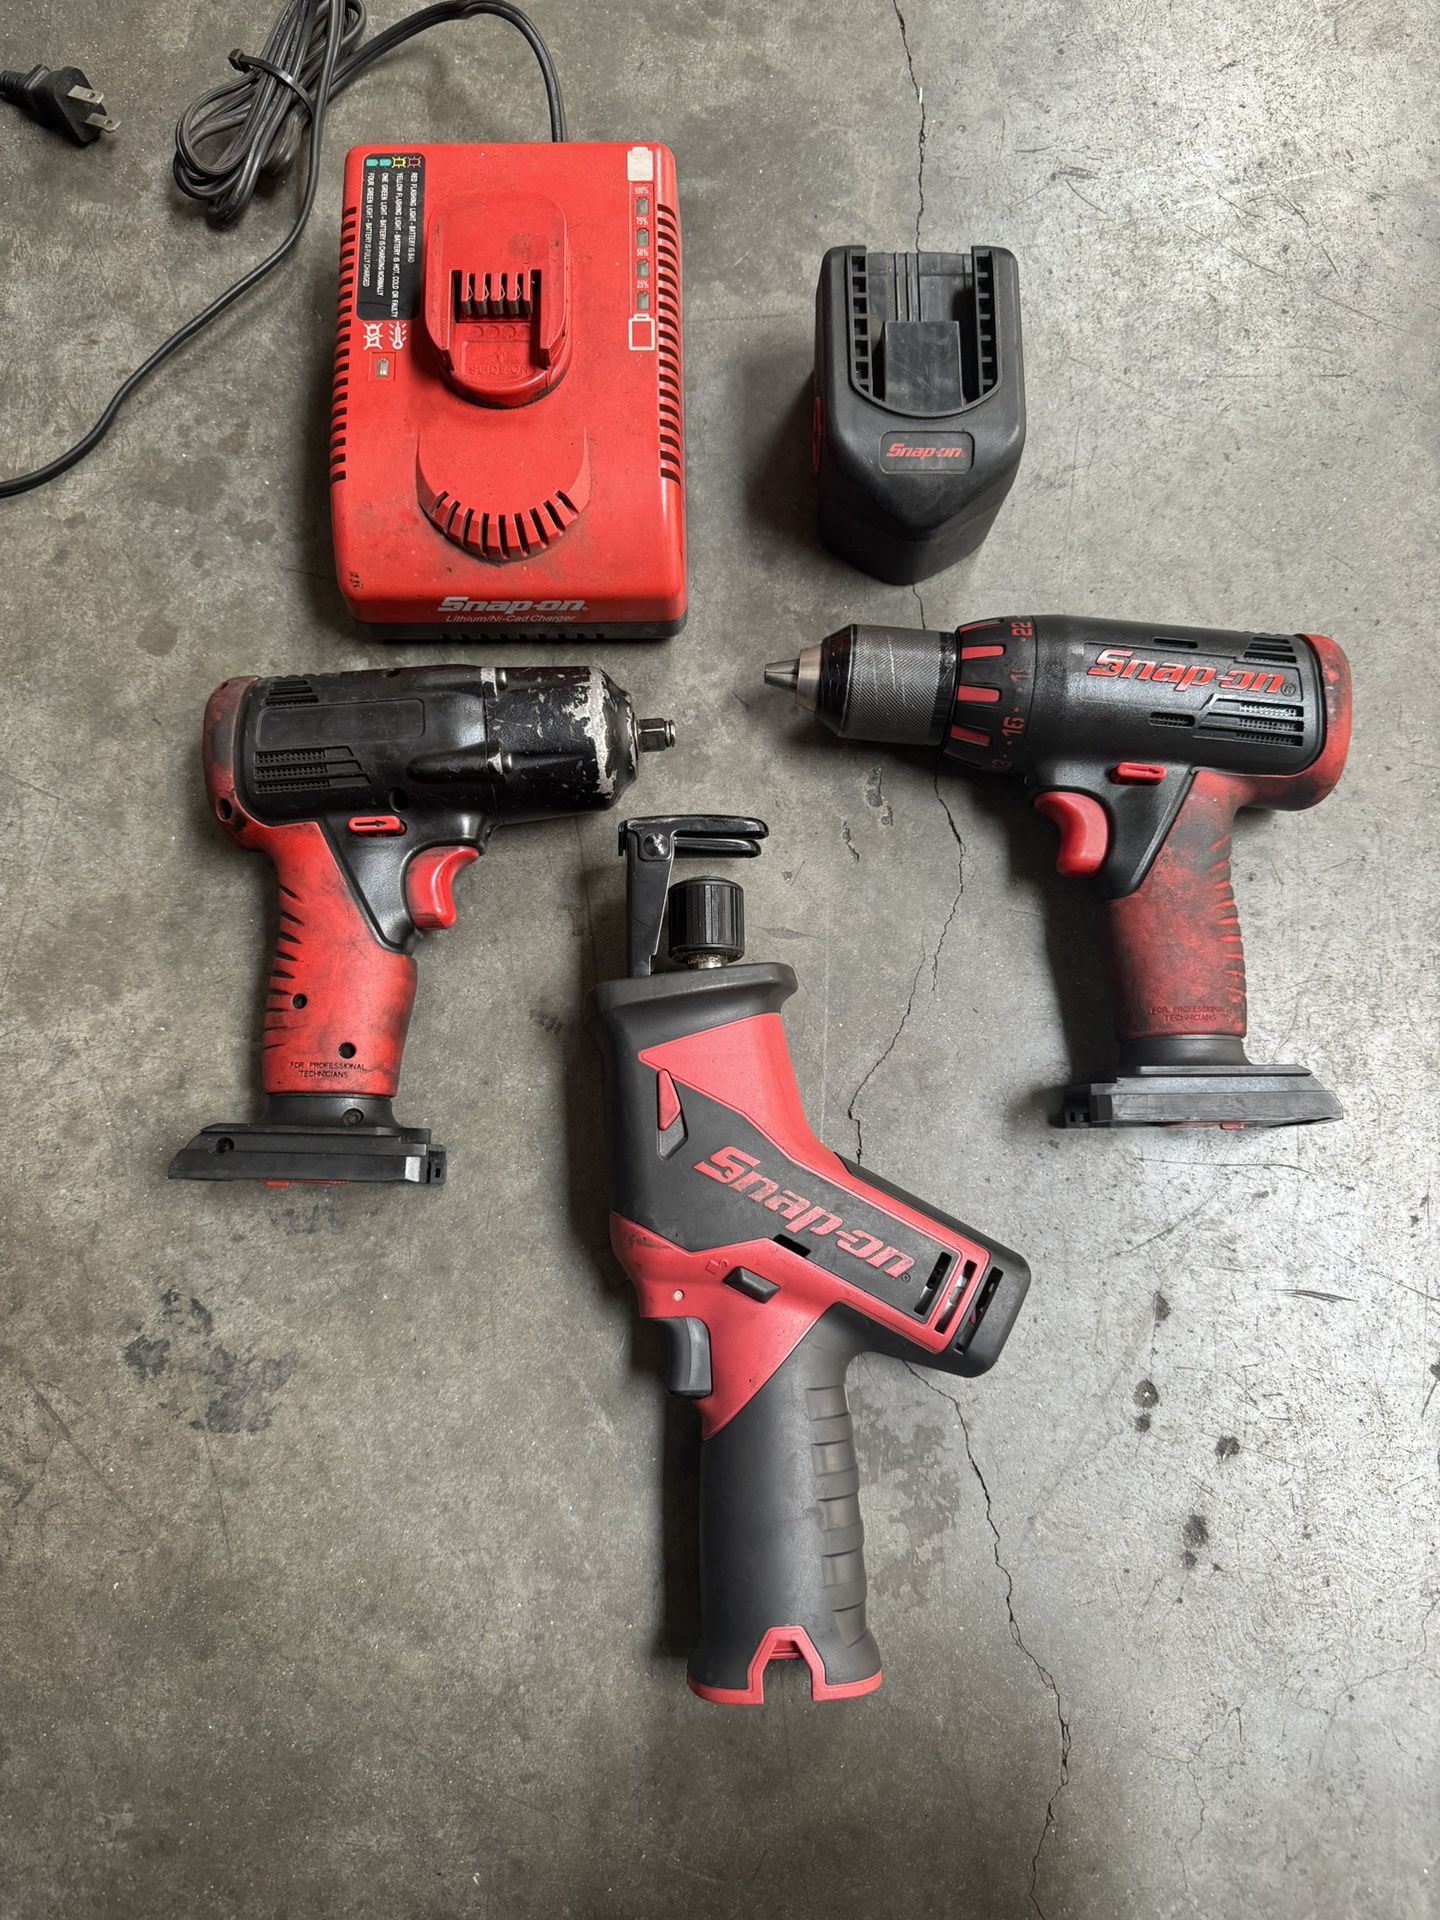 Snap on Impact/drill/saw